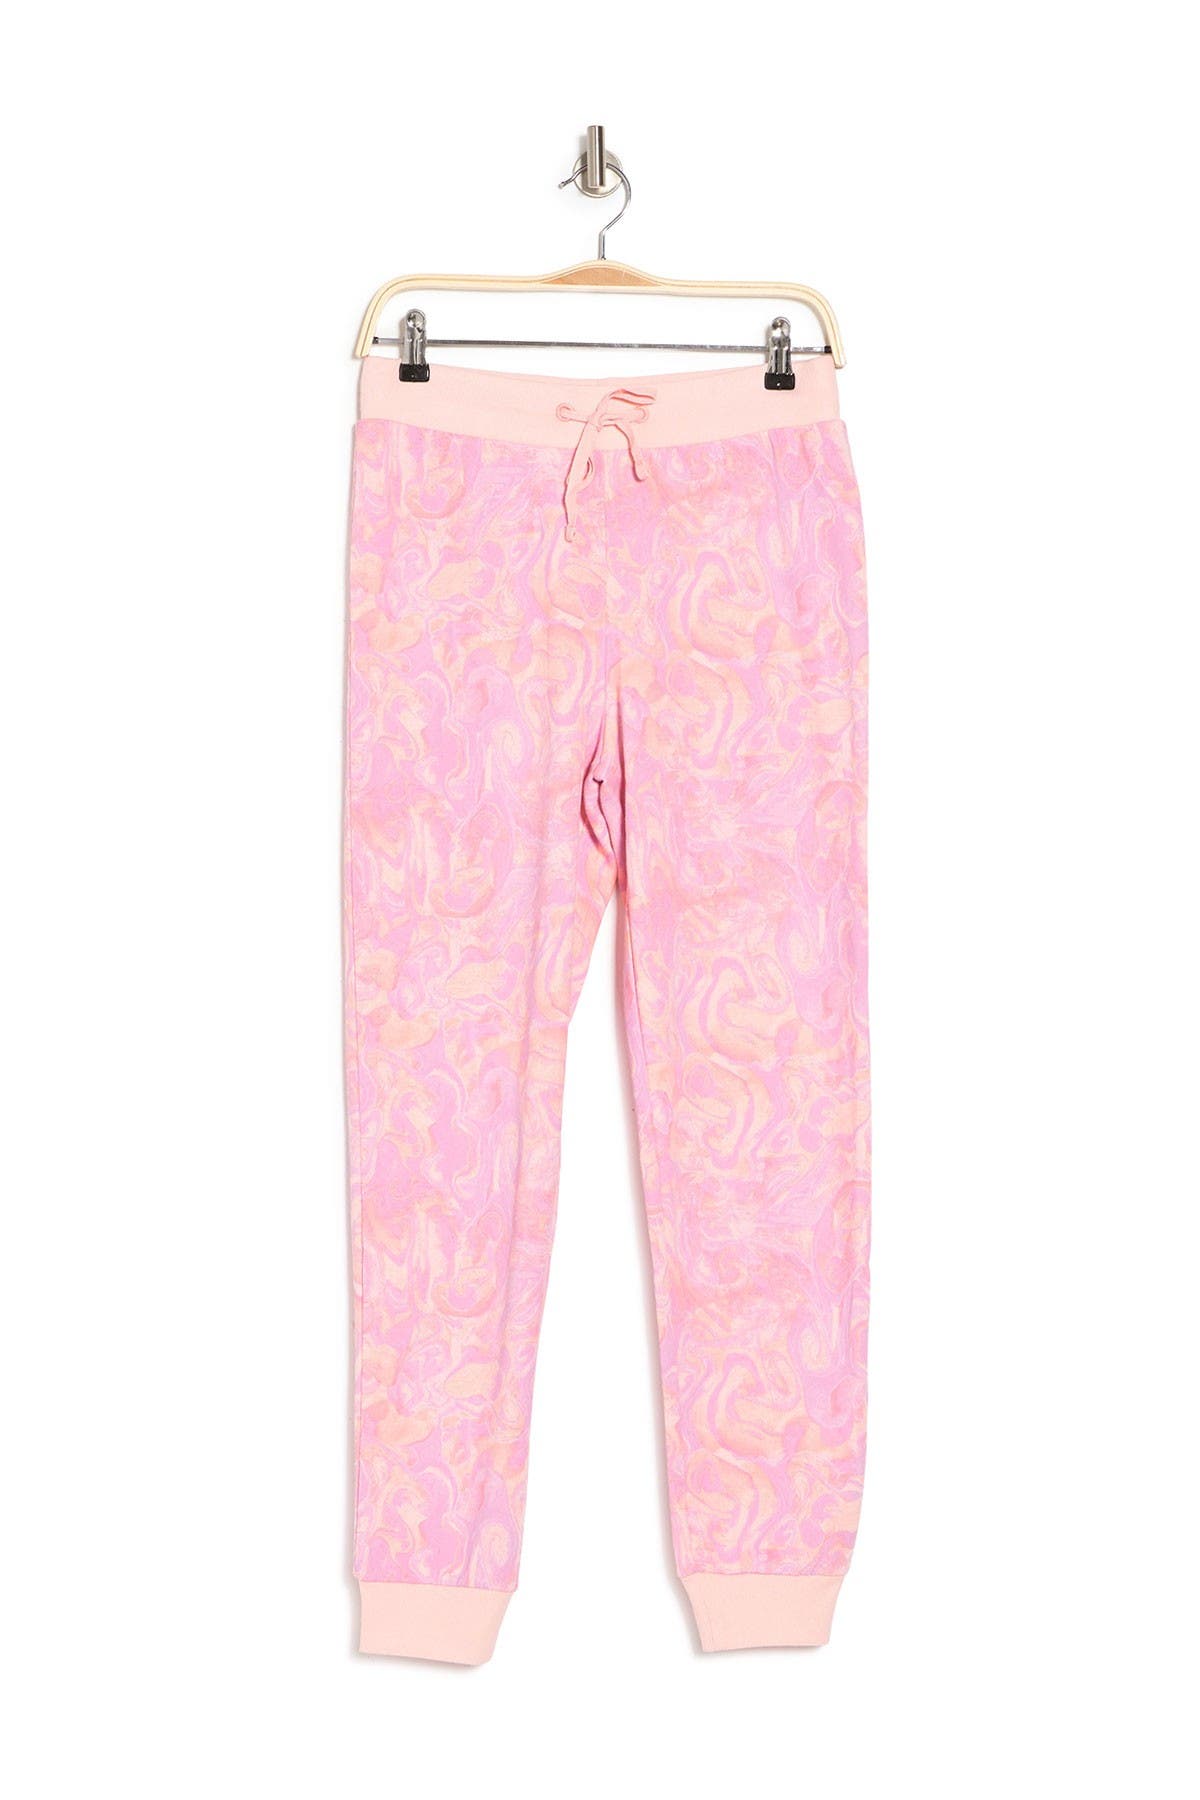 Abound Fleece Drawstring Jogger Pants In Pink- Purple Spacey